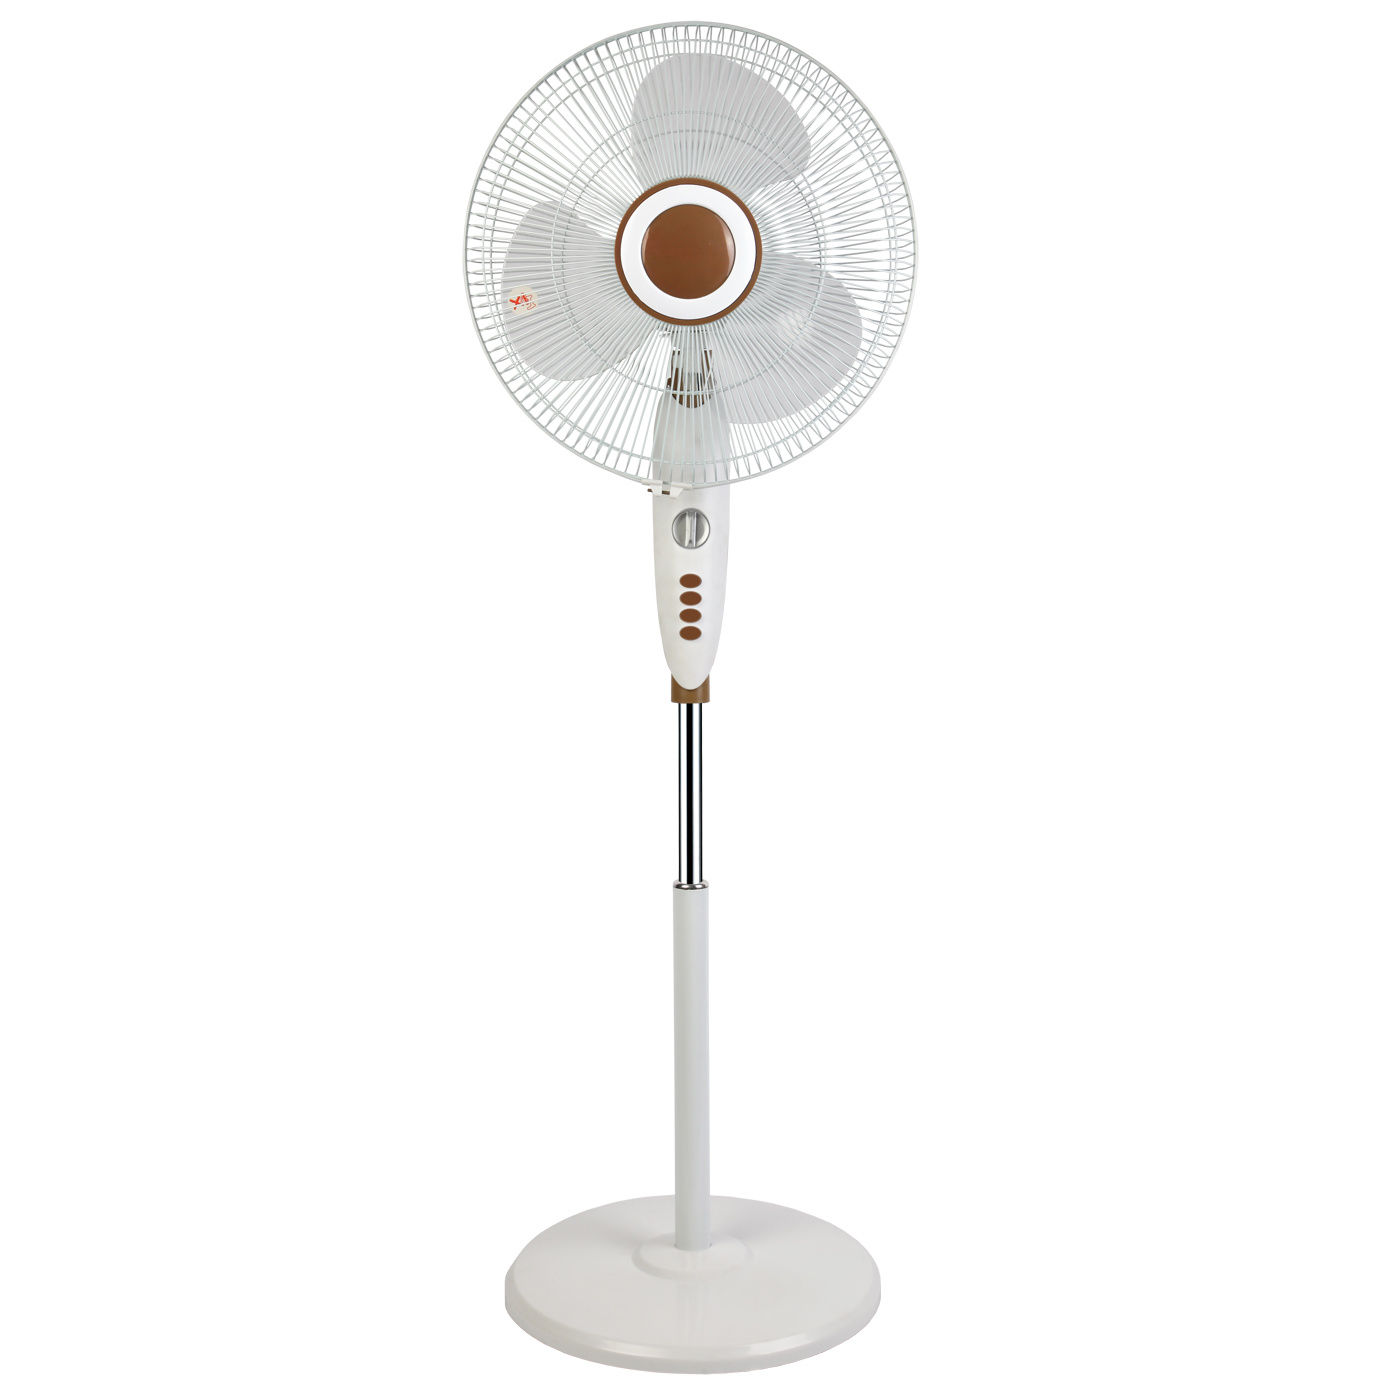 New Stylish Stand Fan with 60 Minutes Timer (FS40-06P)